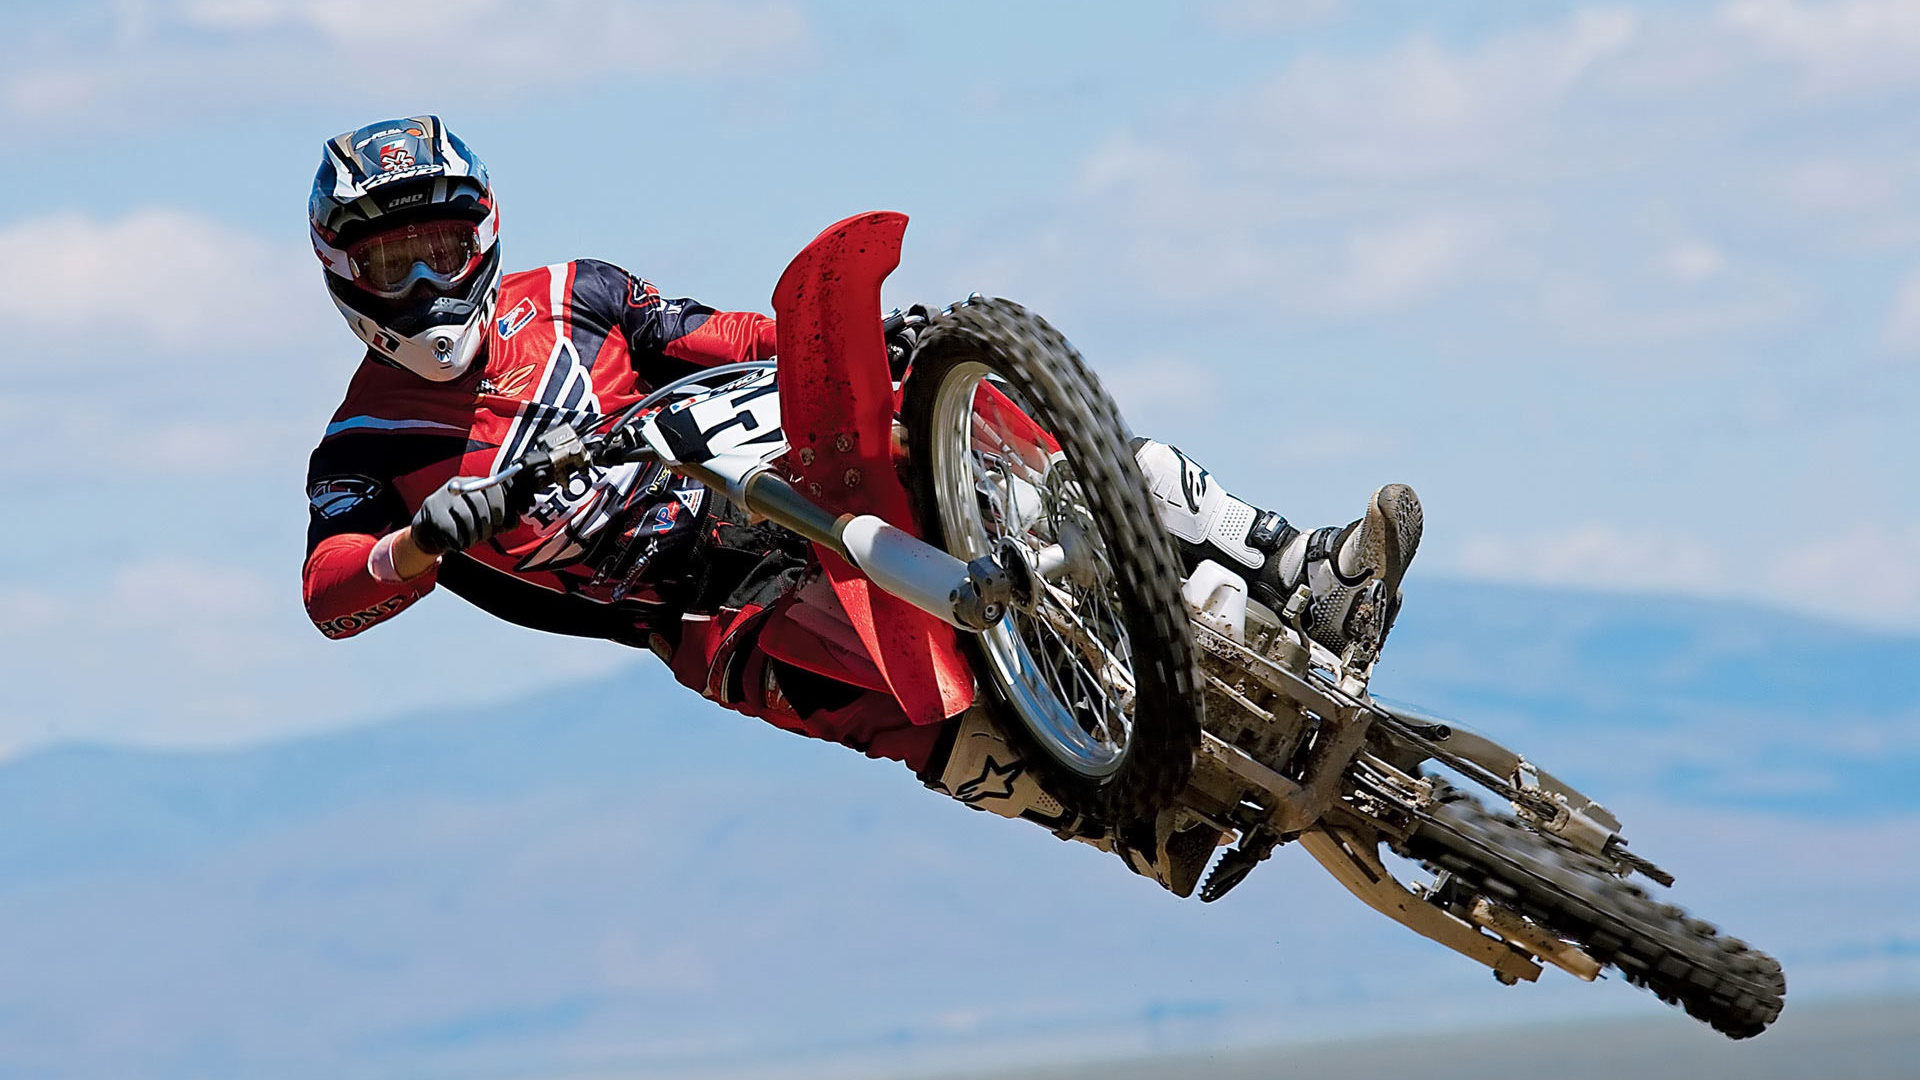 Man in Red and Black Motocross Suit Riding Motocross Dirt Bike. Wallpaper in 1920x1080 Resolution